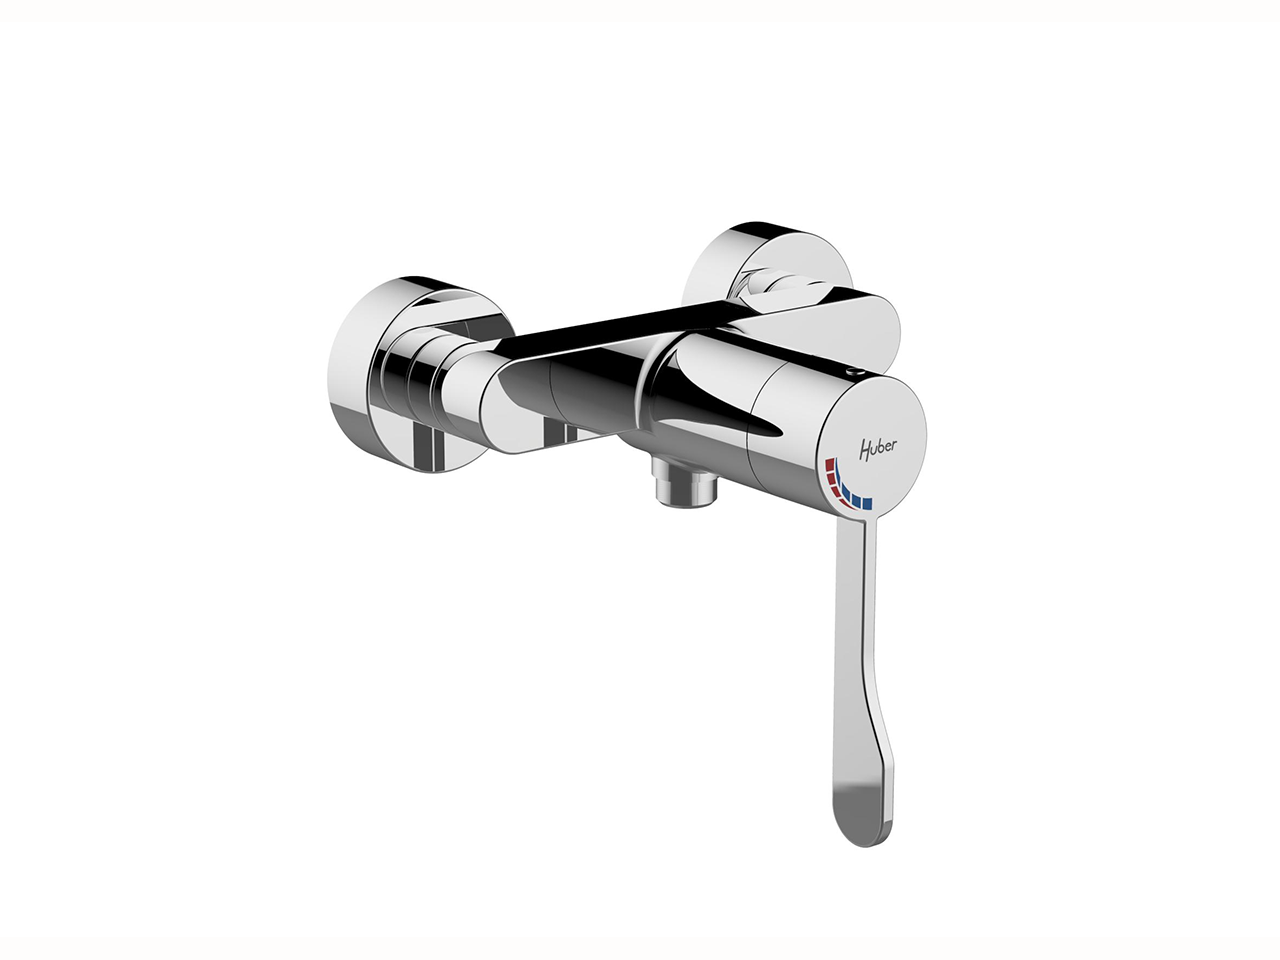 HUBERHTS Design Thermo Sequential Shower Mixer COMMUNITY